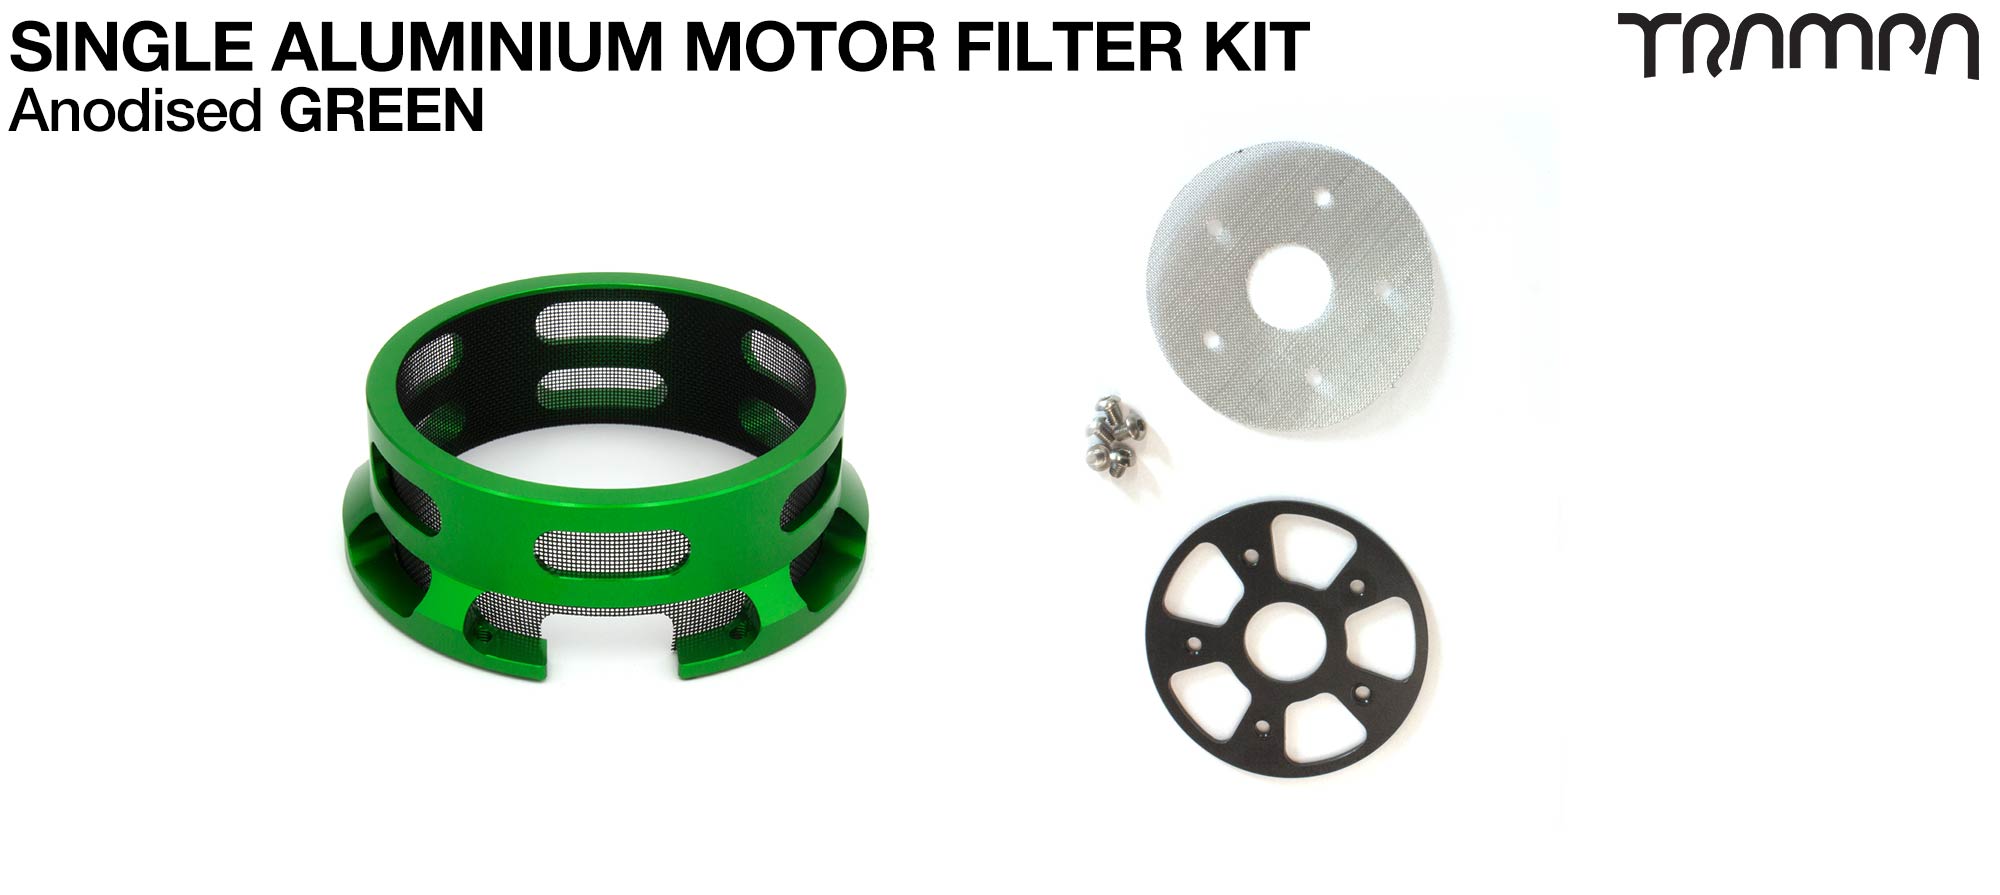 HALF CAGE Motor protection  - GREEN anodised with Filter & Fan - SINGLE